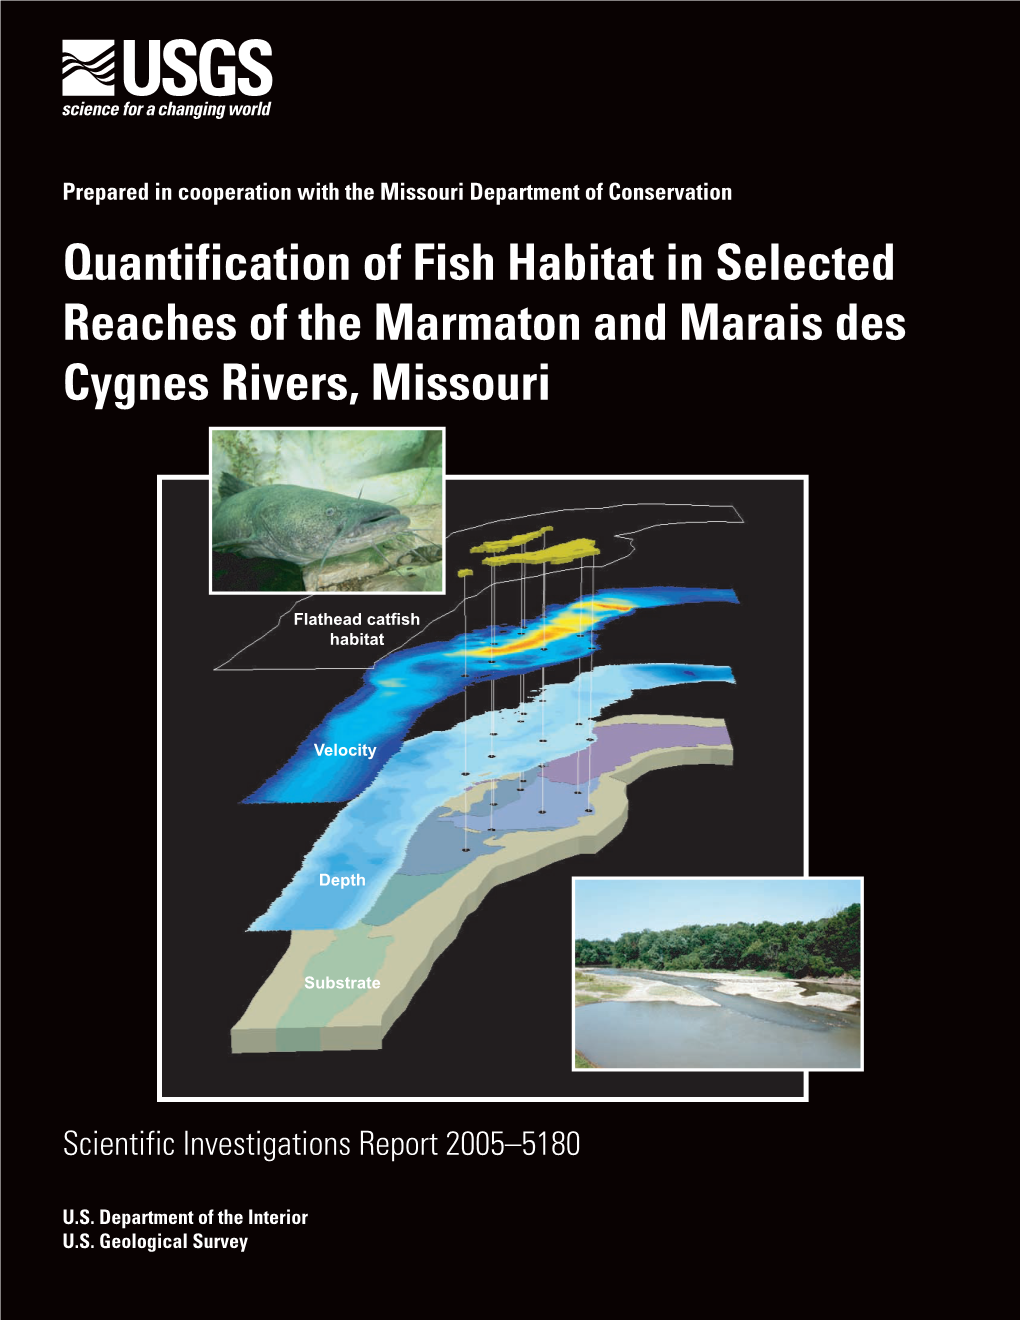 Quantification of Fish Habitat in Selected Reaches of the Marmaton and Marais Des Cygnes Rivers, Missouri